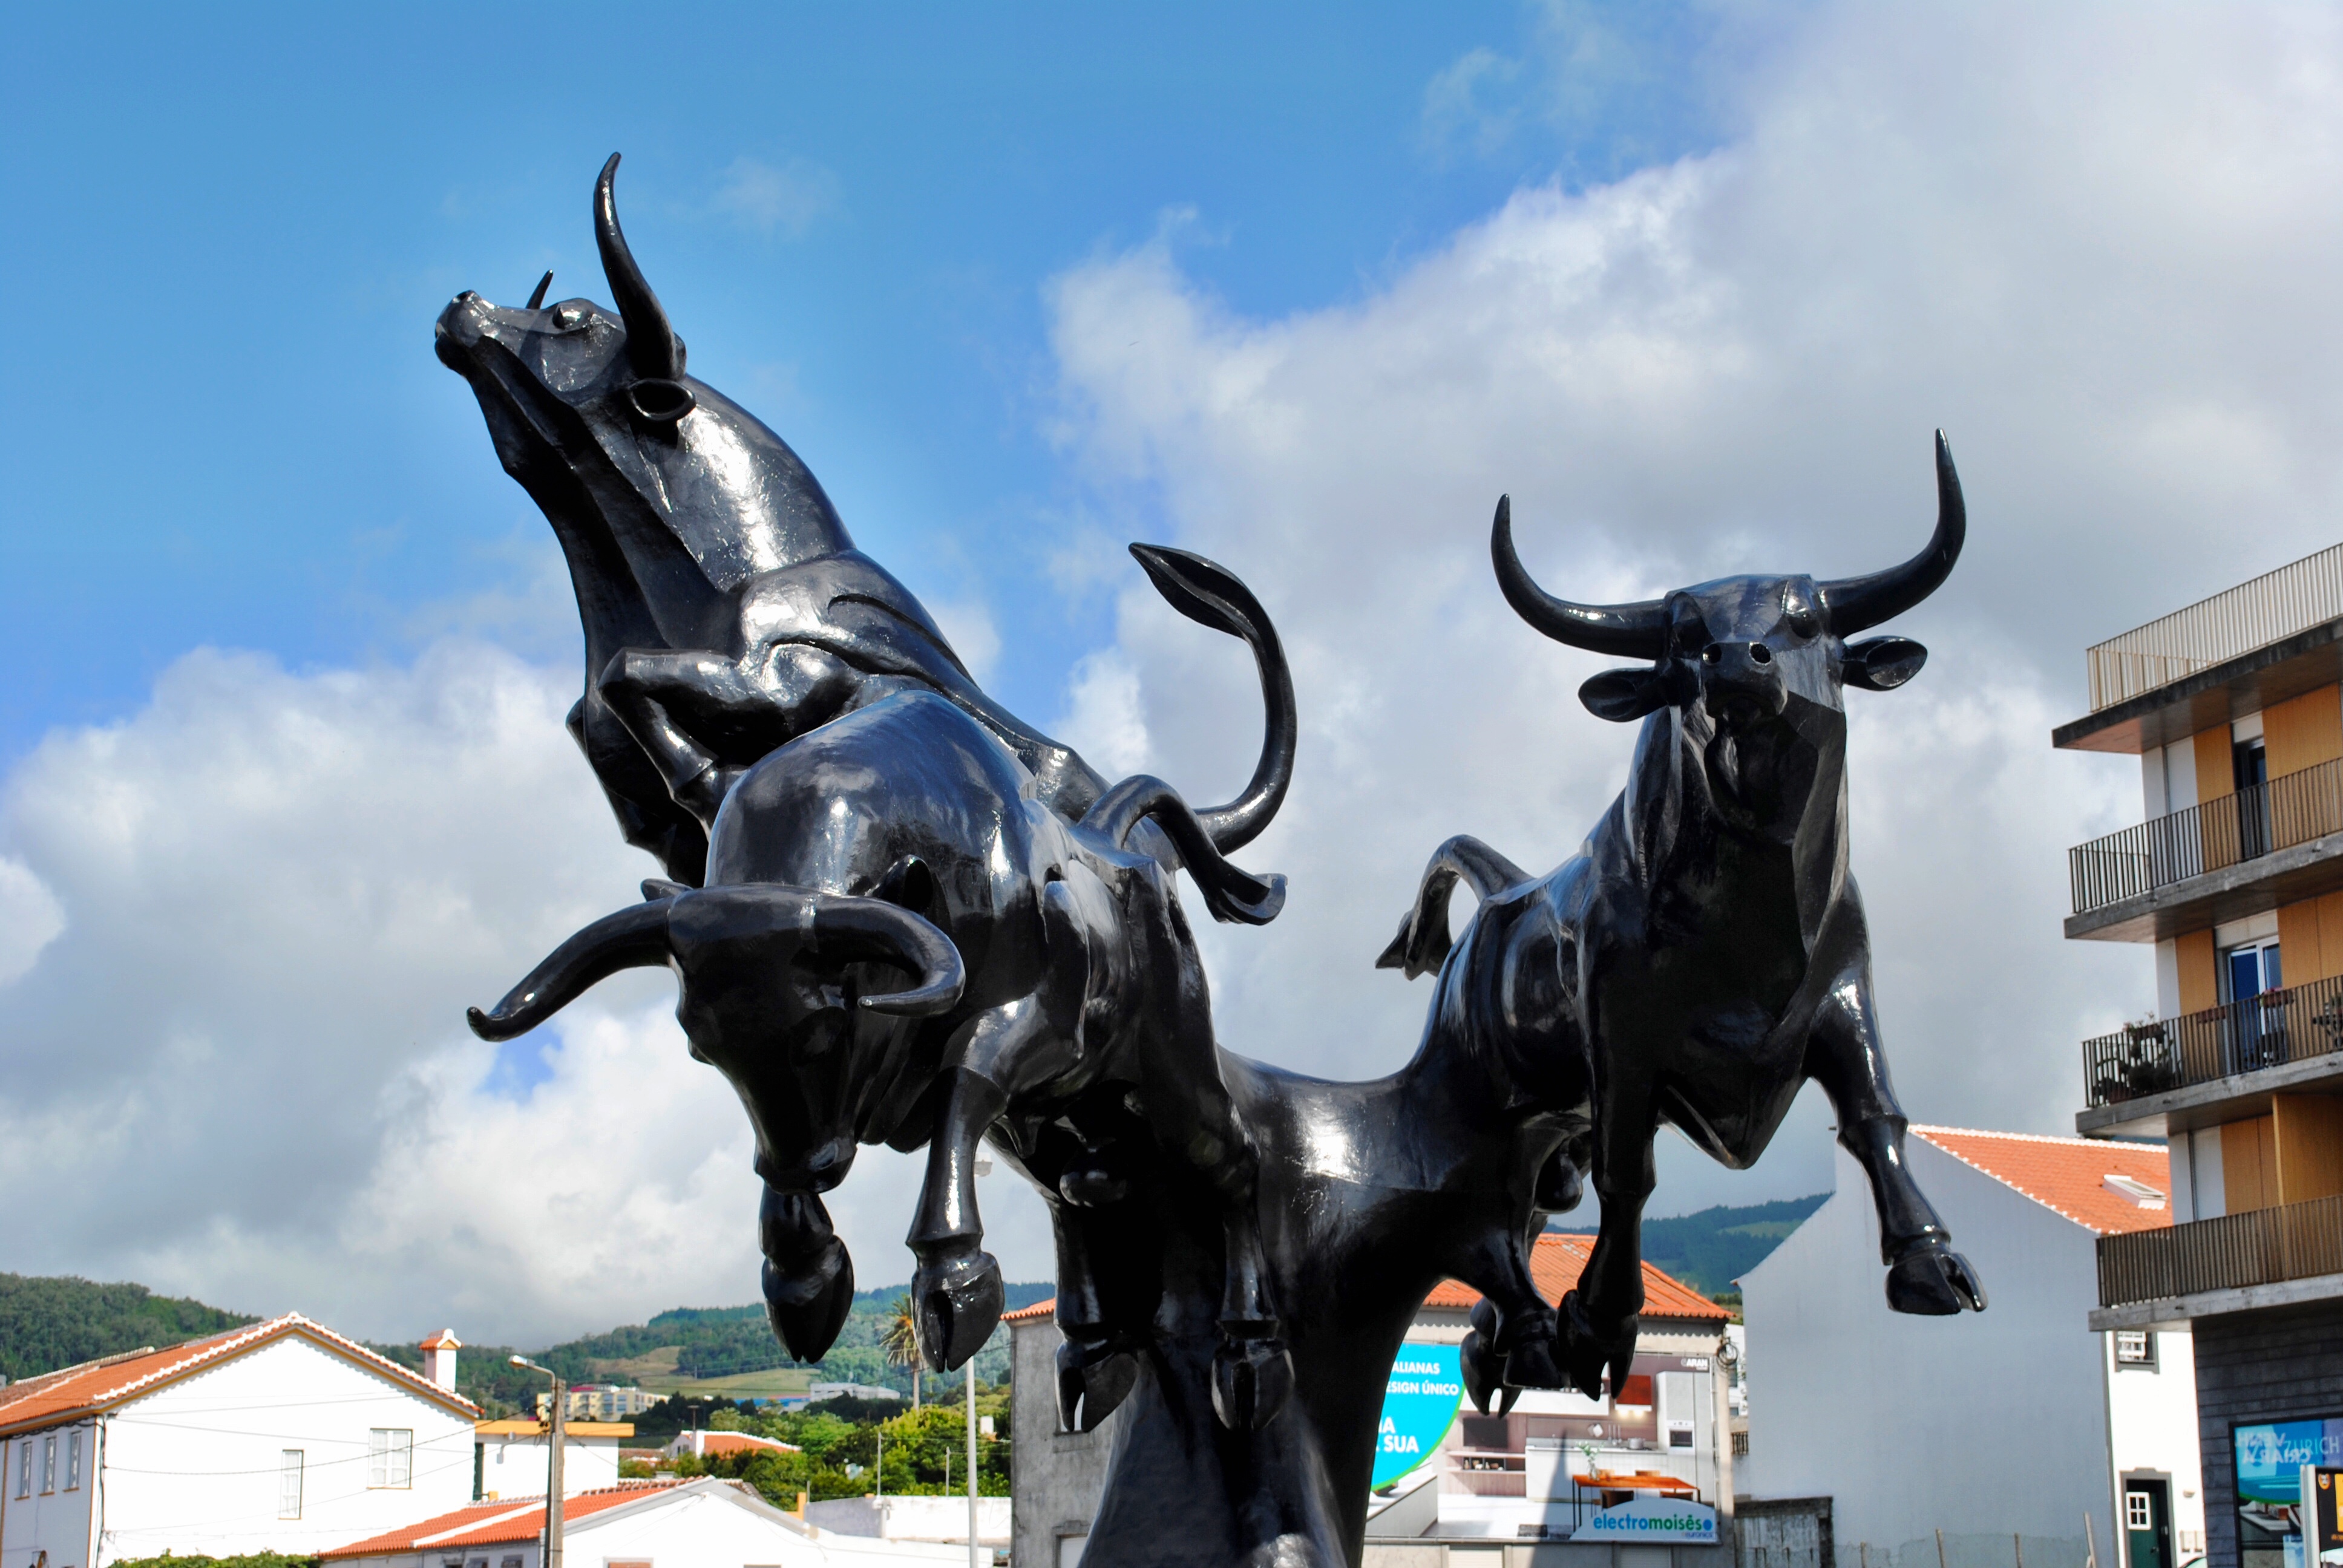 Monument to the Bull, Terceira Island, Azores